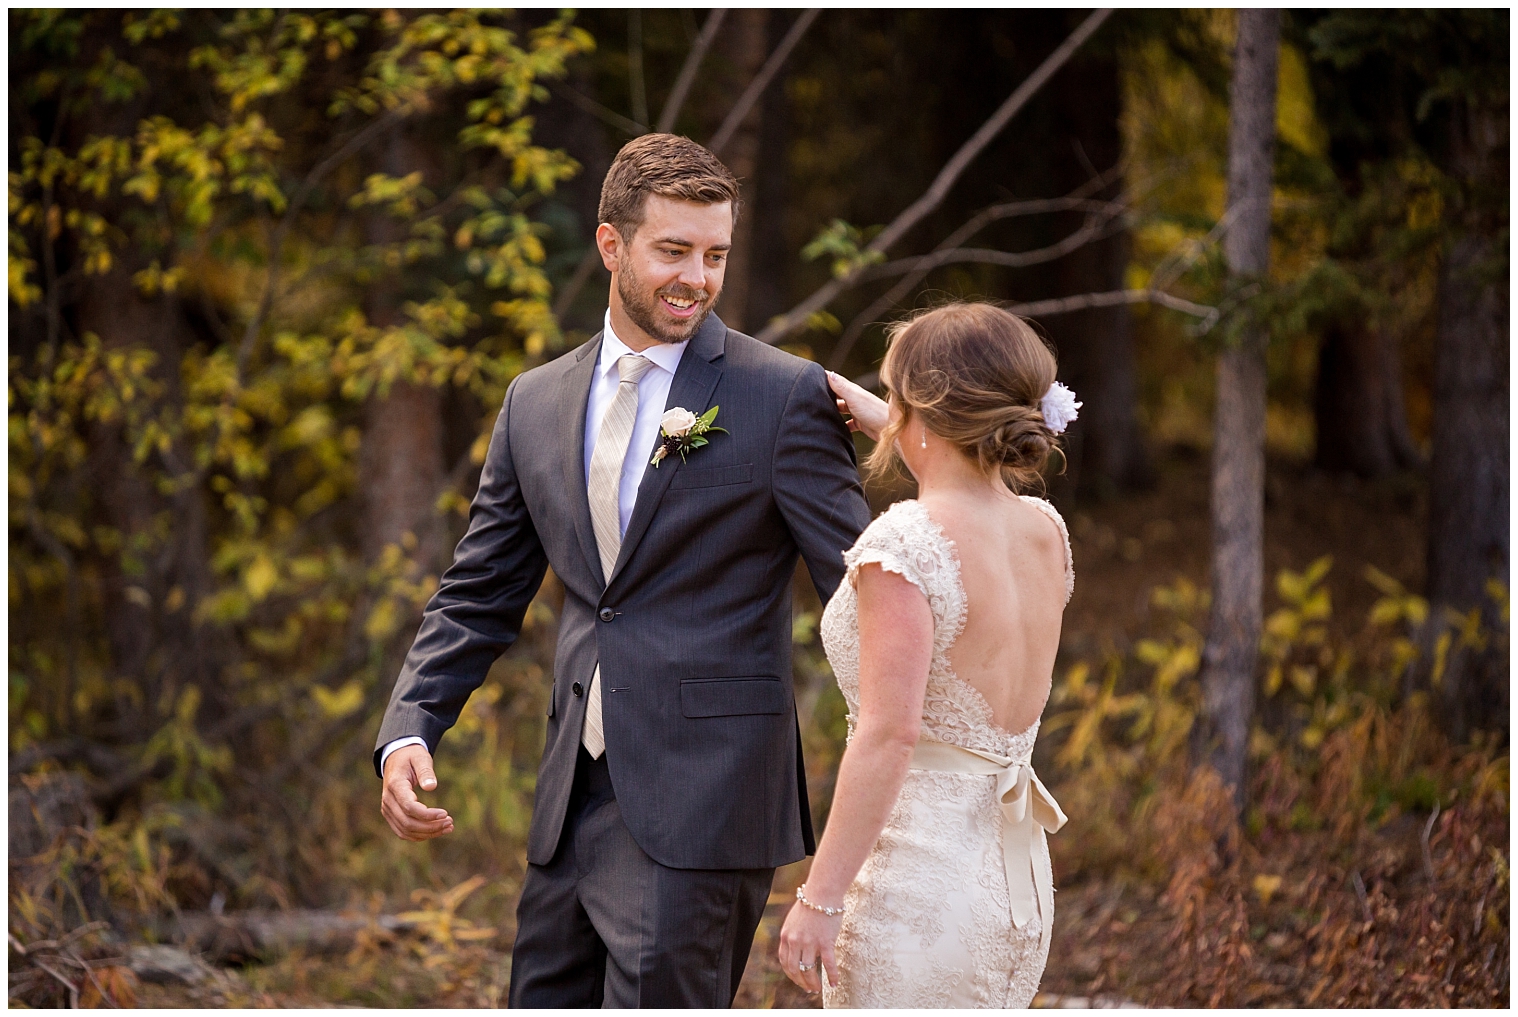 Before their Copper Mountain wedding, the groom sees his bride for the first time.